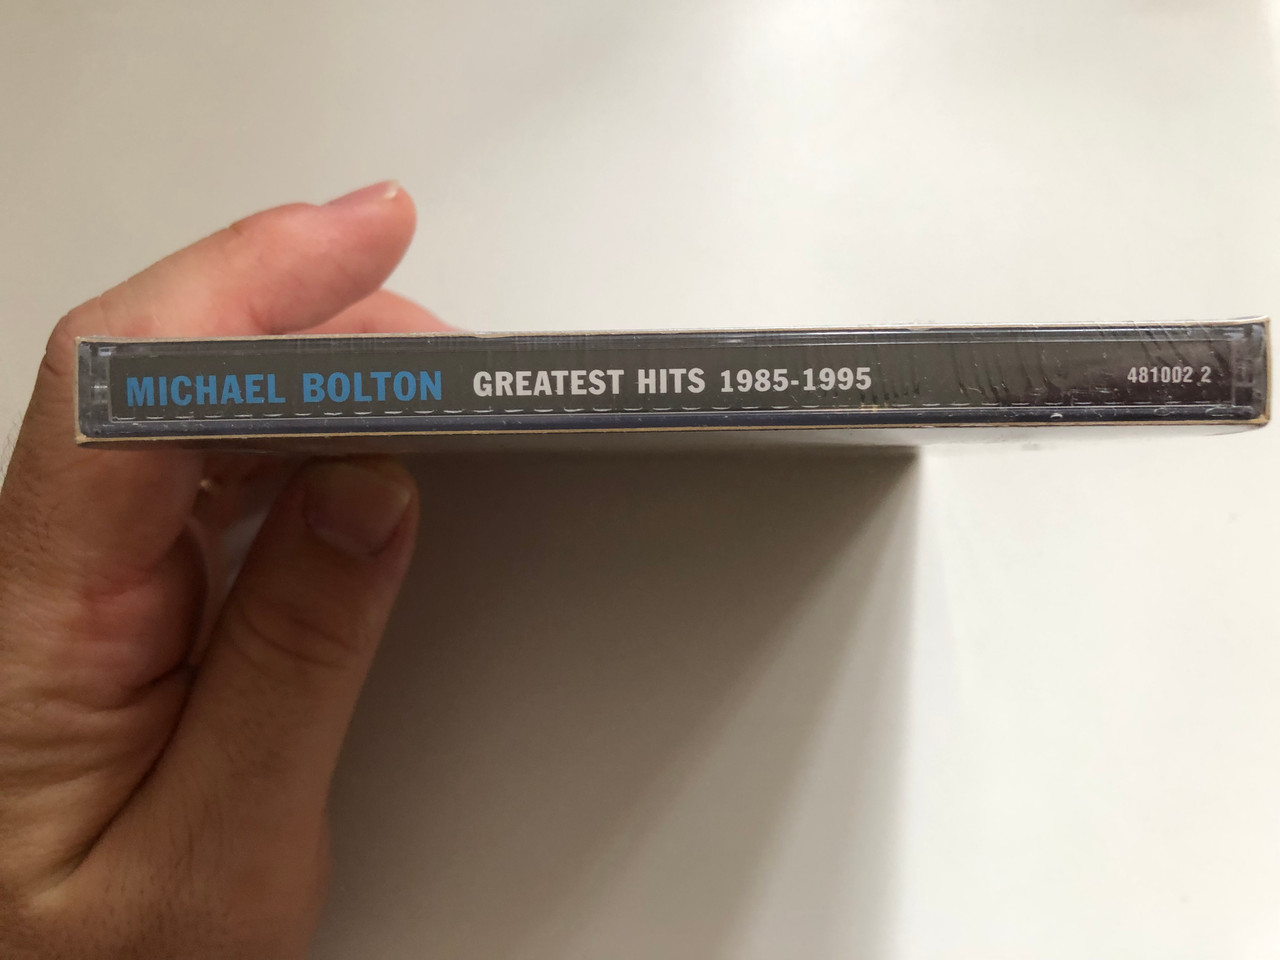 https://cdn10.bigcommerce.com/s-62bdpkt7pb/products/0/images/294767/Michael_Bolton_Greatest_Hits_1985_-_1995_-_The_Best_Of_The_Best_Platinum_Can_I_Touch_You..._There_Georgia_On_My_Mind_How_Am_I_Supposed_To_Live_Without_You_Lean_On_Me_This_River_And_Ma_3__08795.1692612634.1280.1280.JPG?c=2&_gl=1*gcmchd*_ga*MjA2NTIxMjE2MC4xNTkwNTEyNTMy*_ga_WS2VZYPC6G*MTY5MjYwMjgwOS4xMDM4LjEuMTY5MjYxMjYxMC42MC4wLjA.